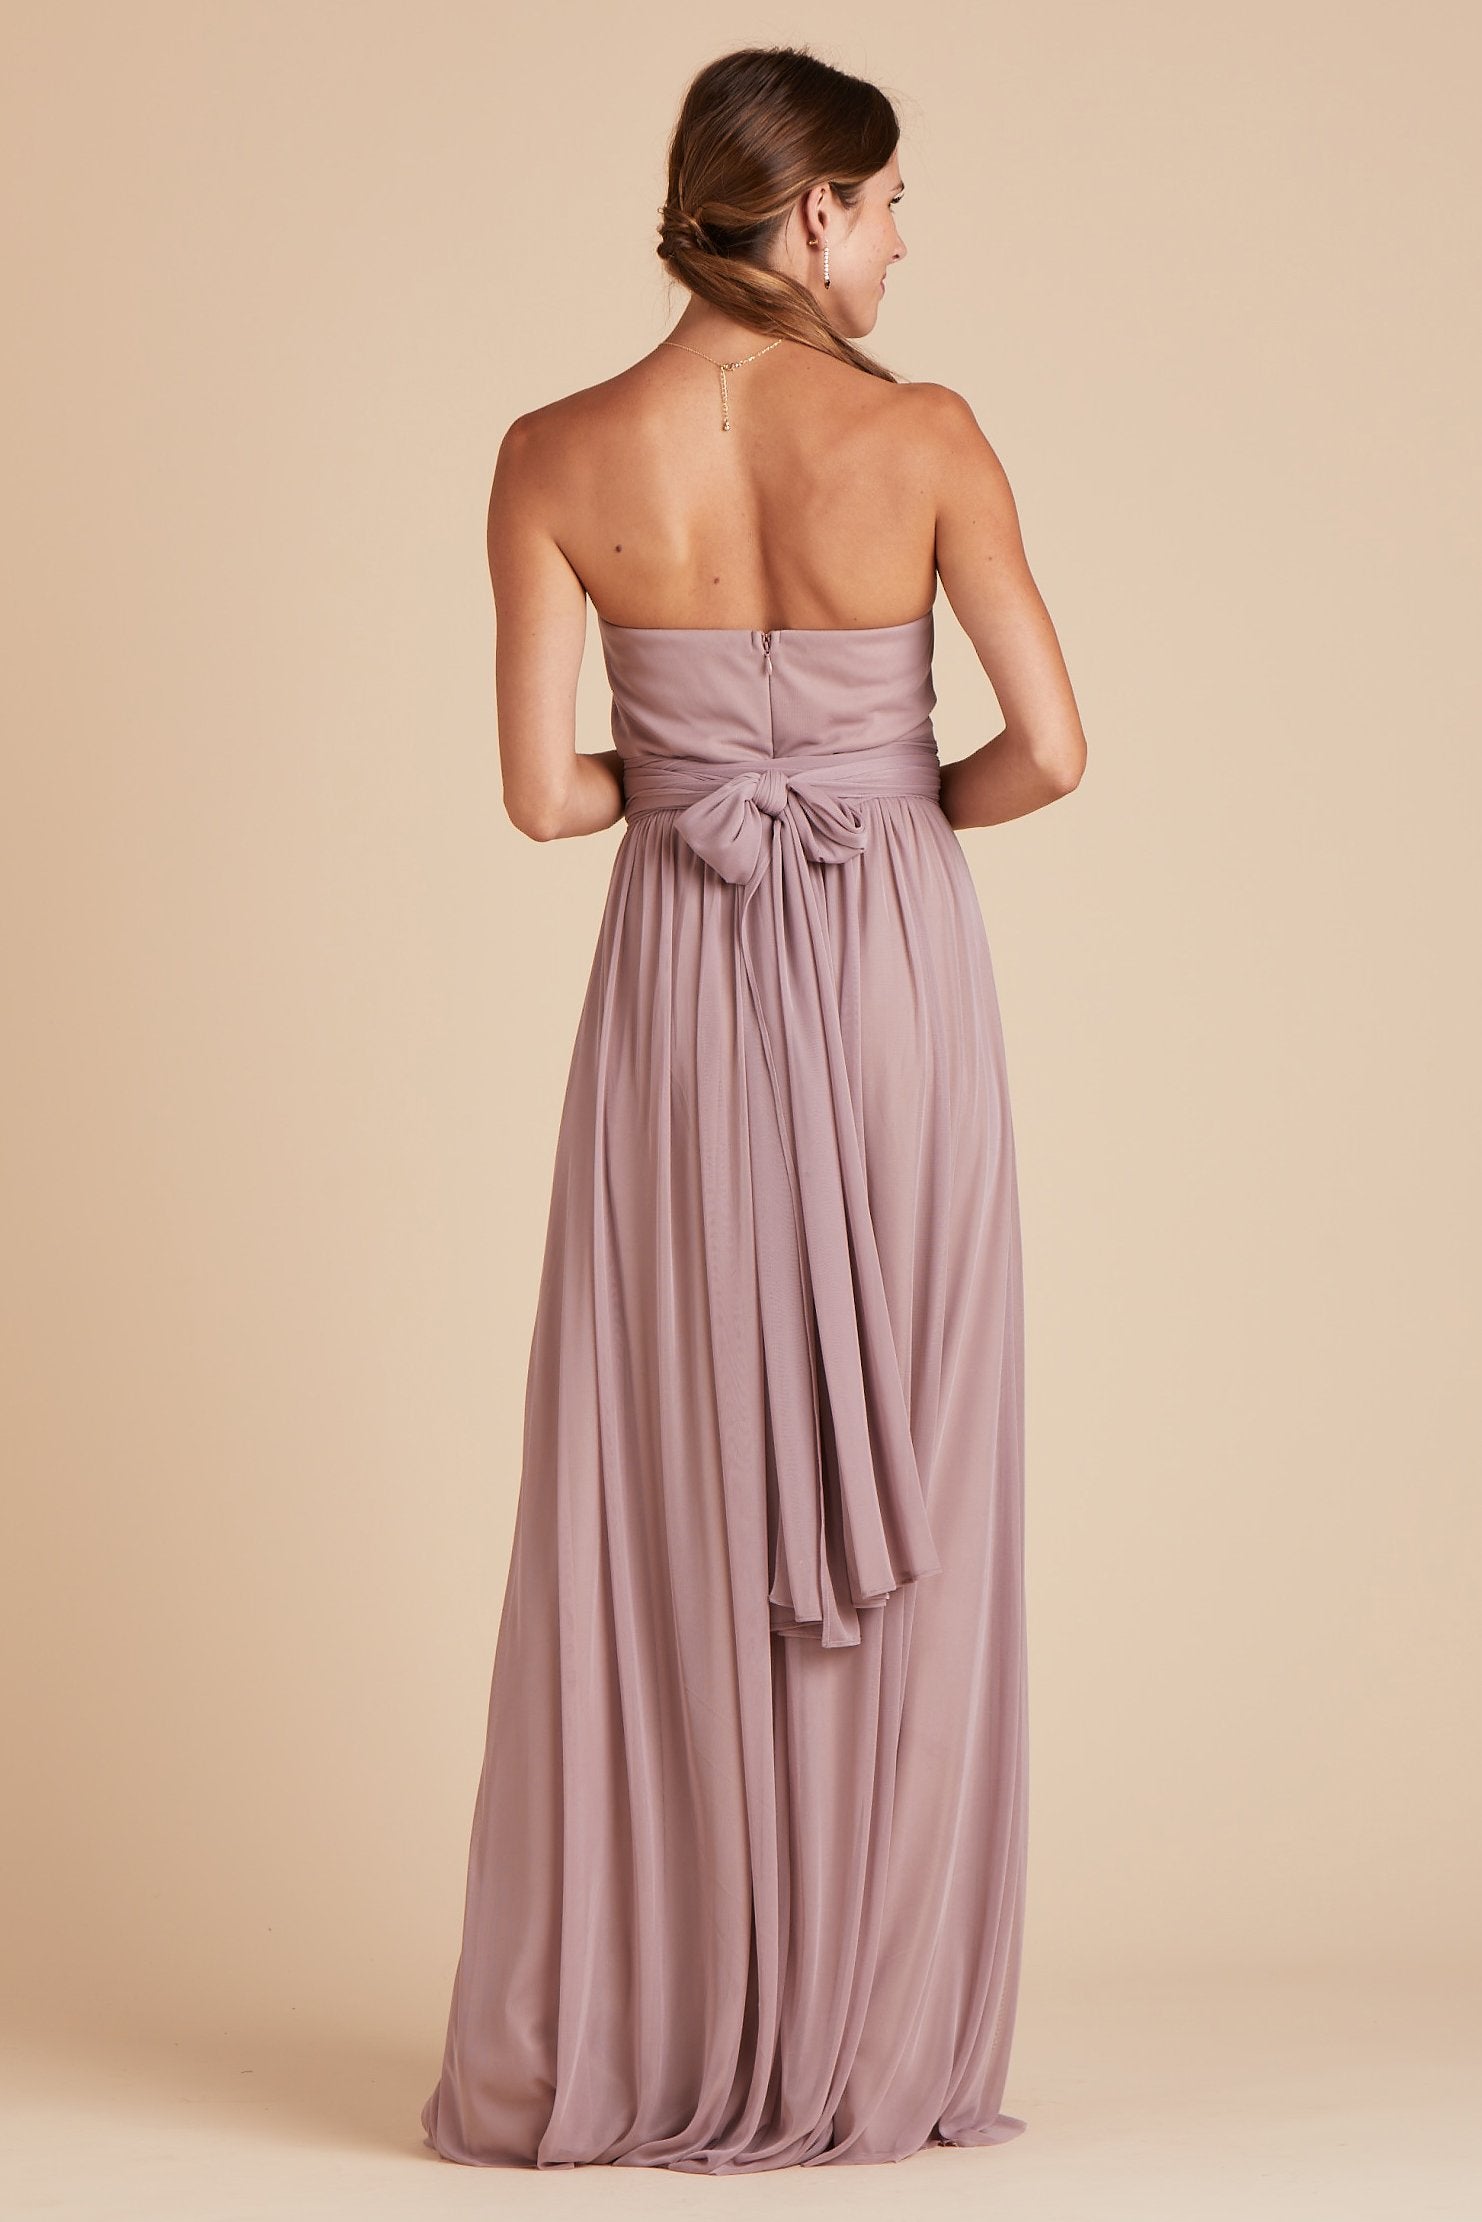 Chicky convertible bridesmaid dress in mauve purple mesh by Birdy Grey, back view